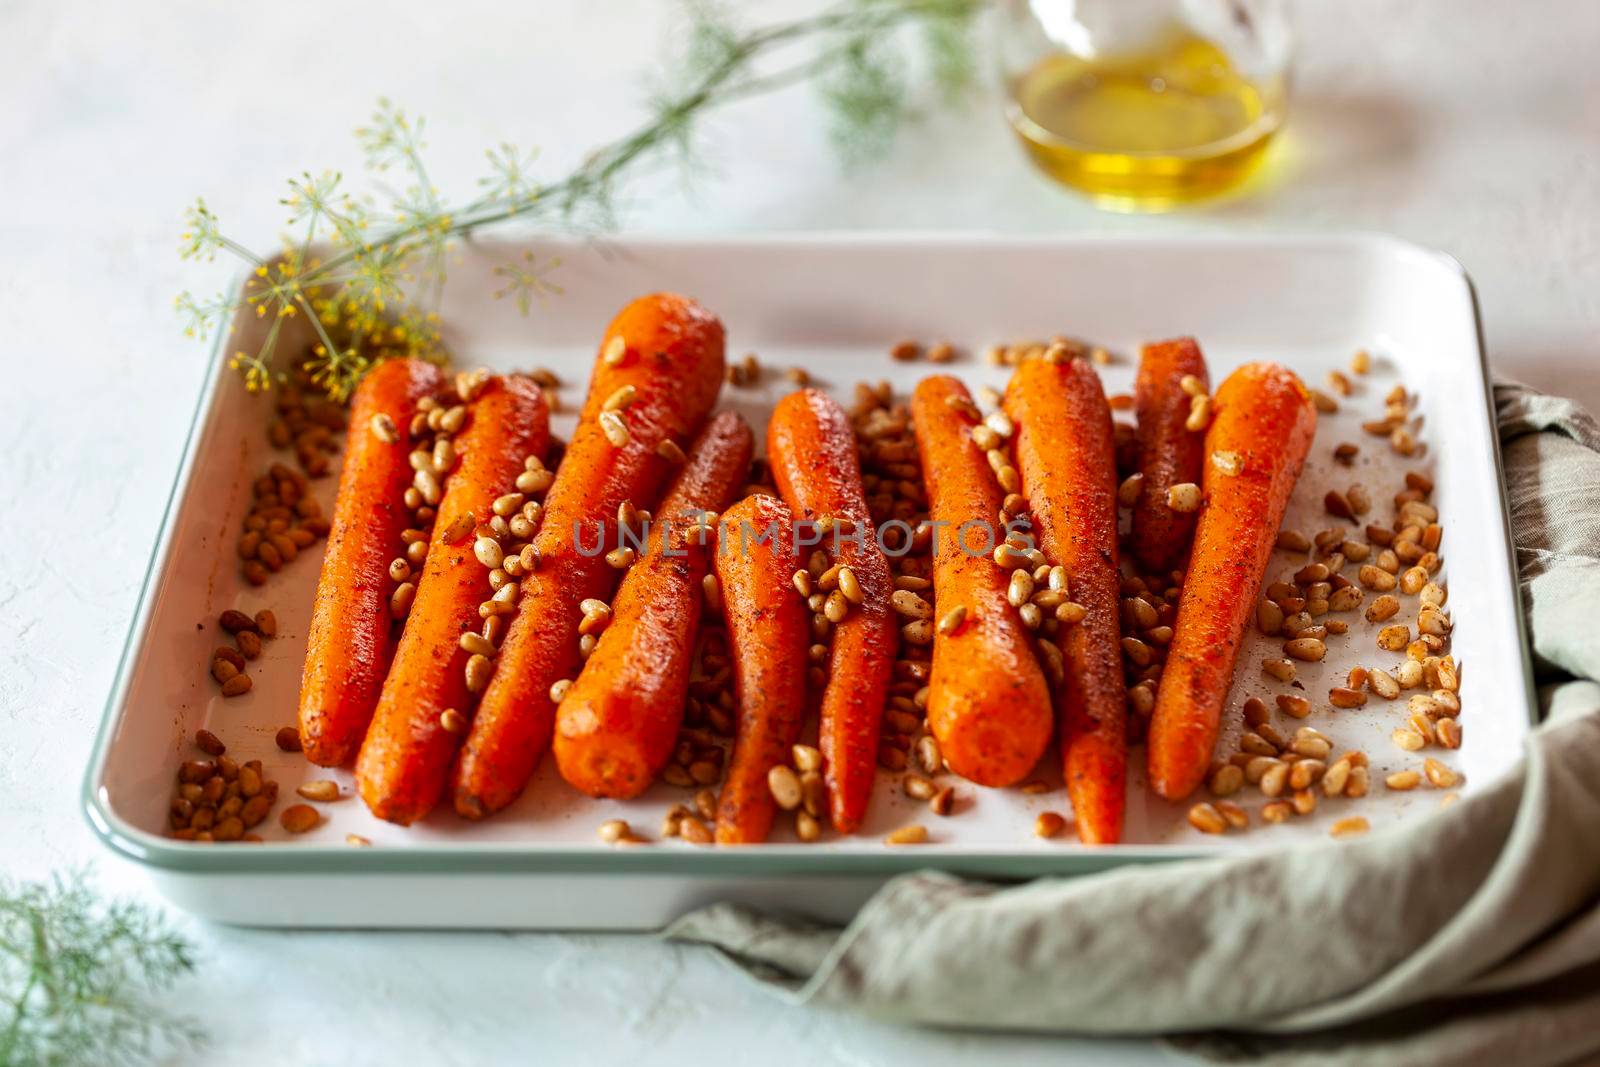 Lebanese-style carrots prepared with pine nuts and cumin, side view